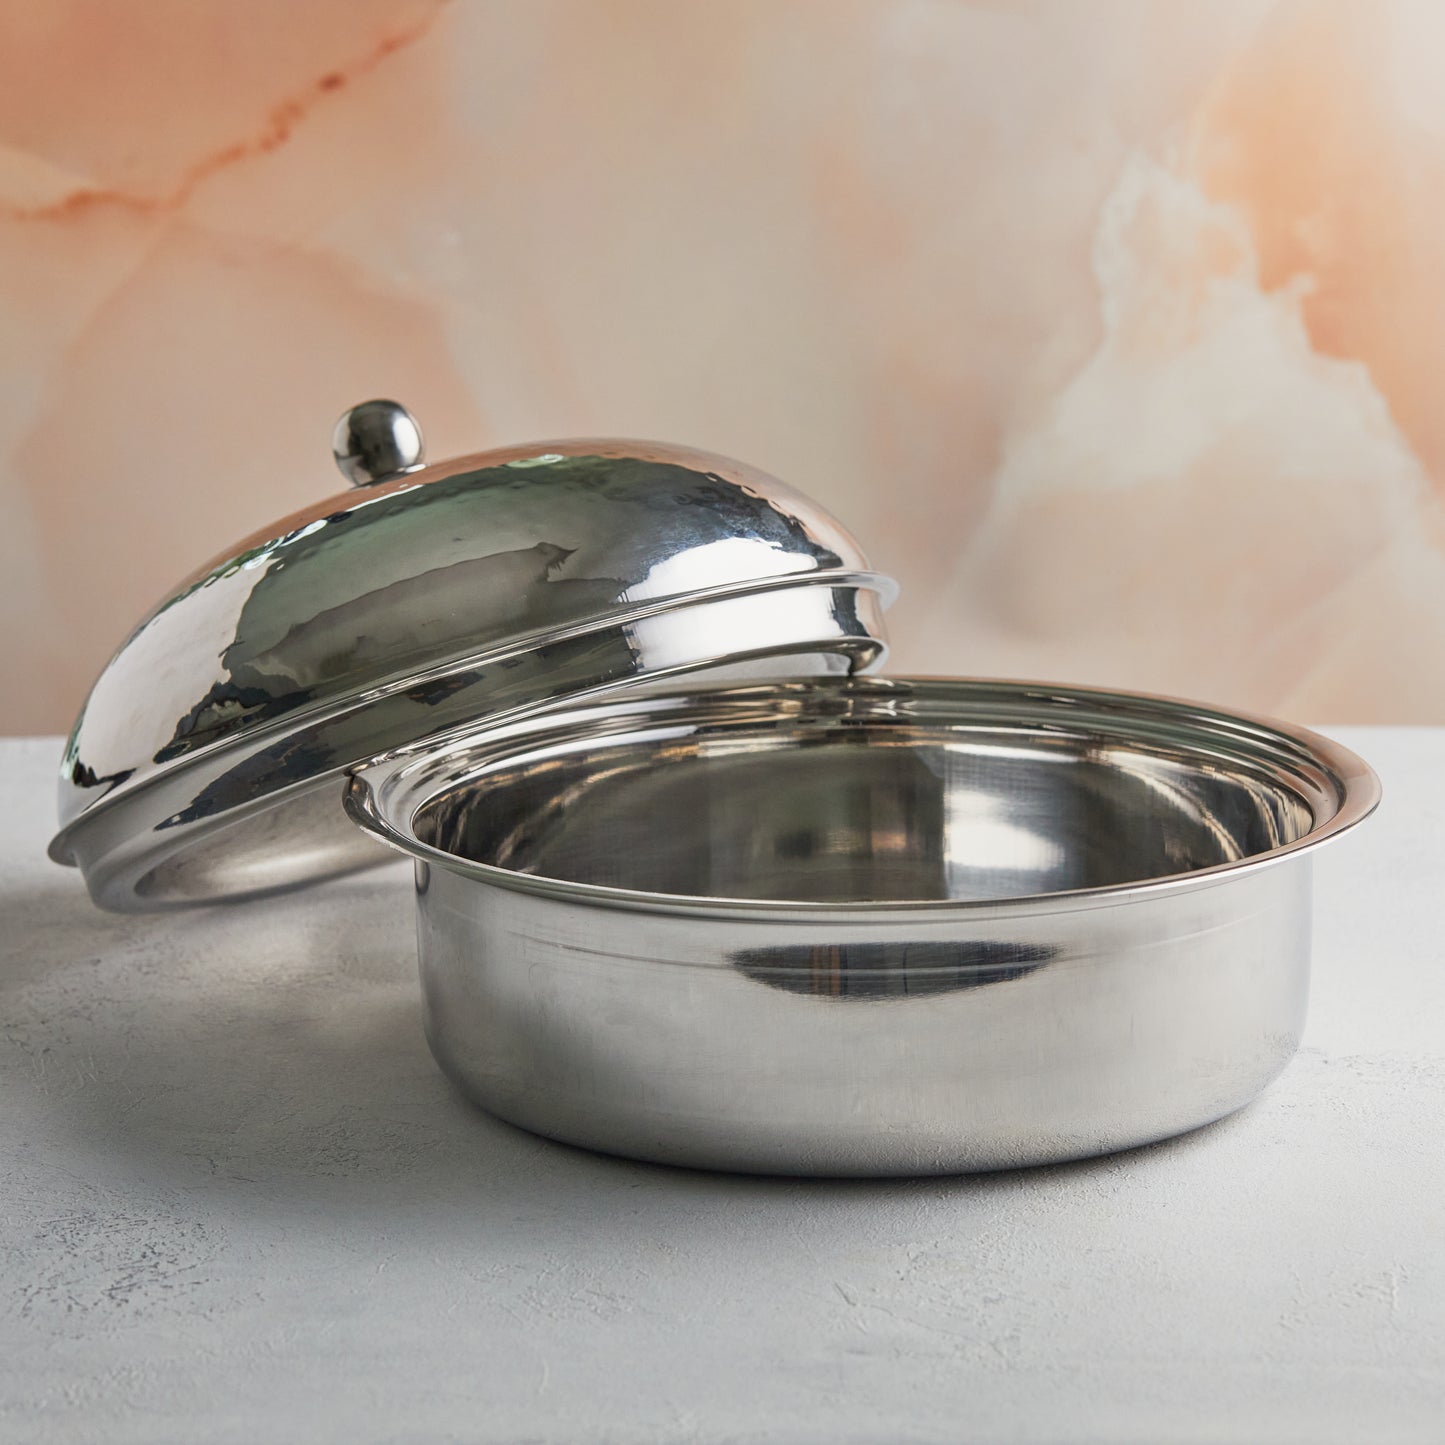 Handcrafted Green Mother of Pearl with Insulated Stainless Steel Casserole 3.5L